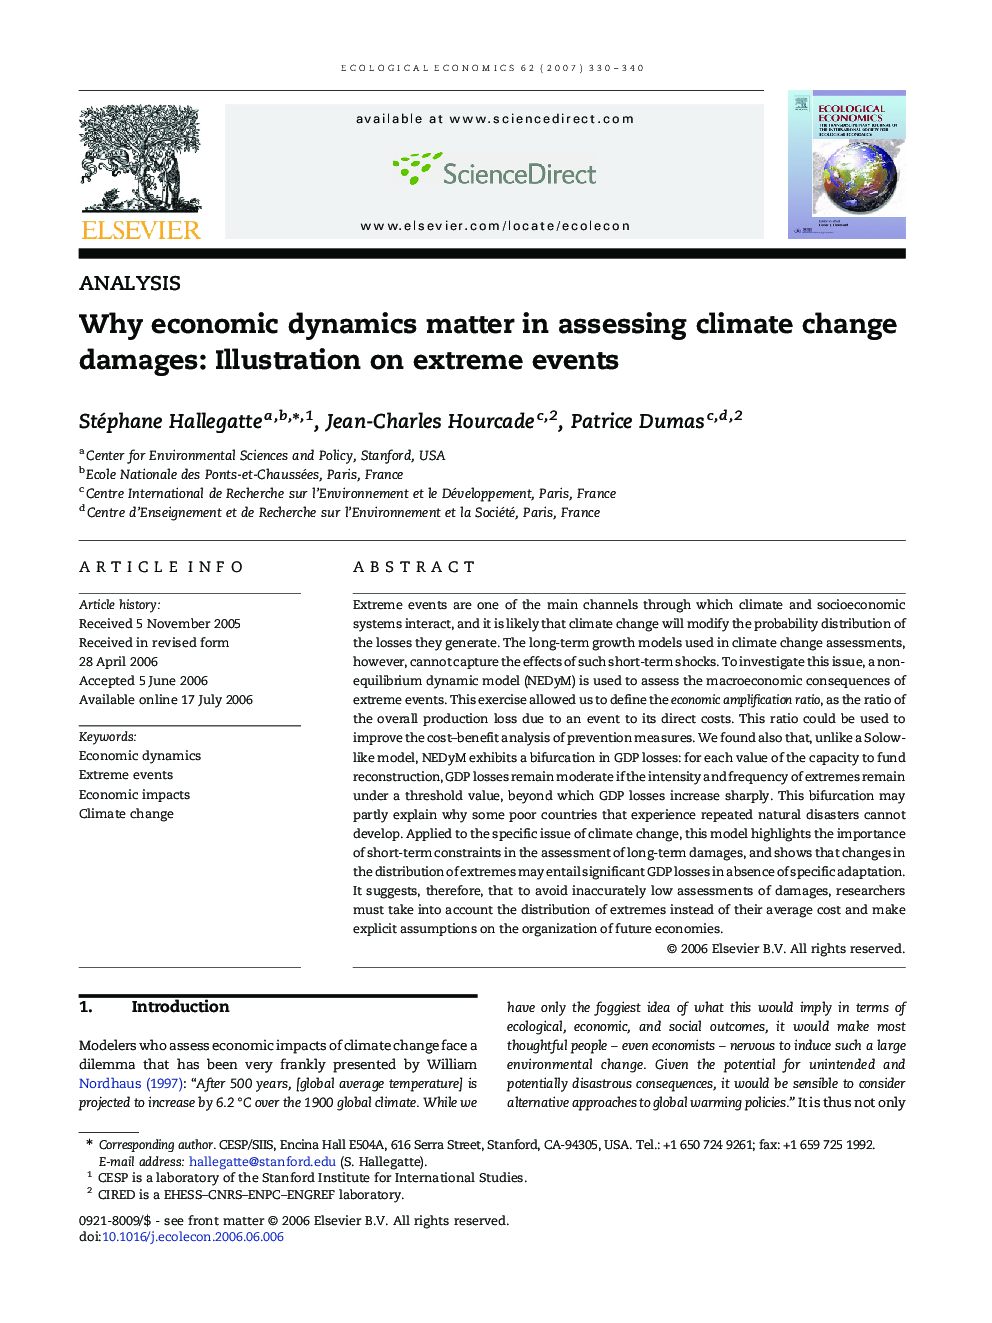 Why economic dynamics matter in assessing climate change damages: Illustration on extreme events